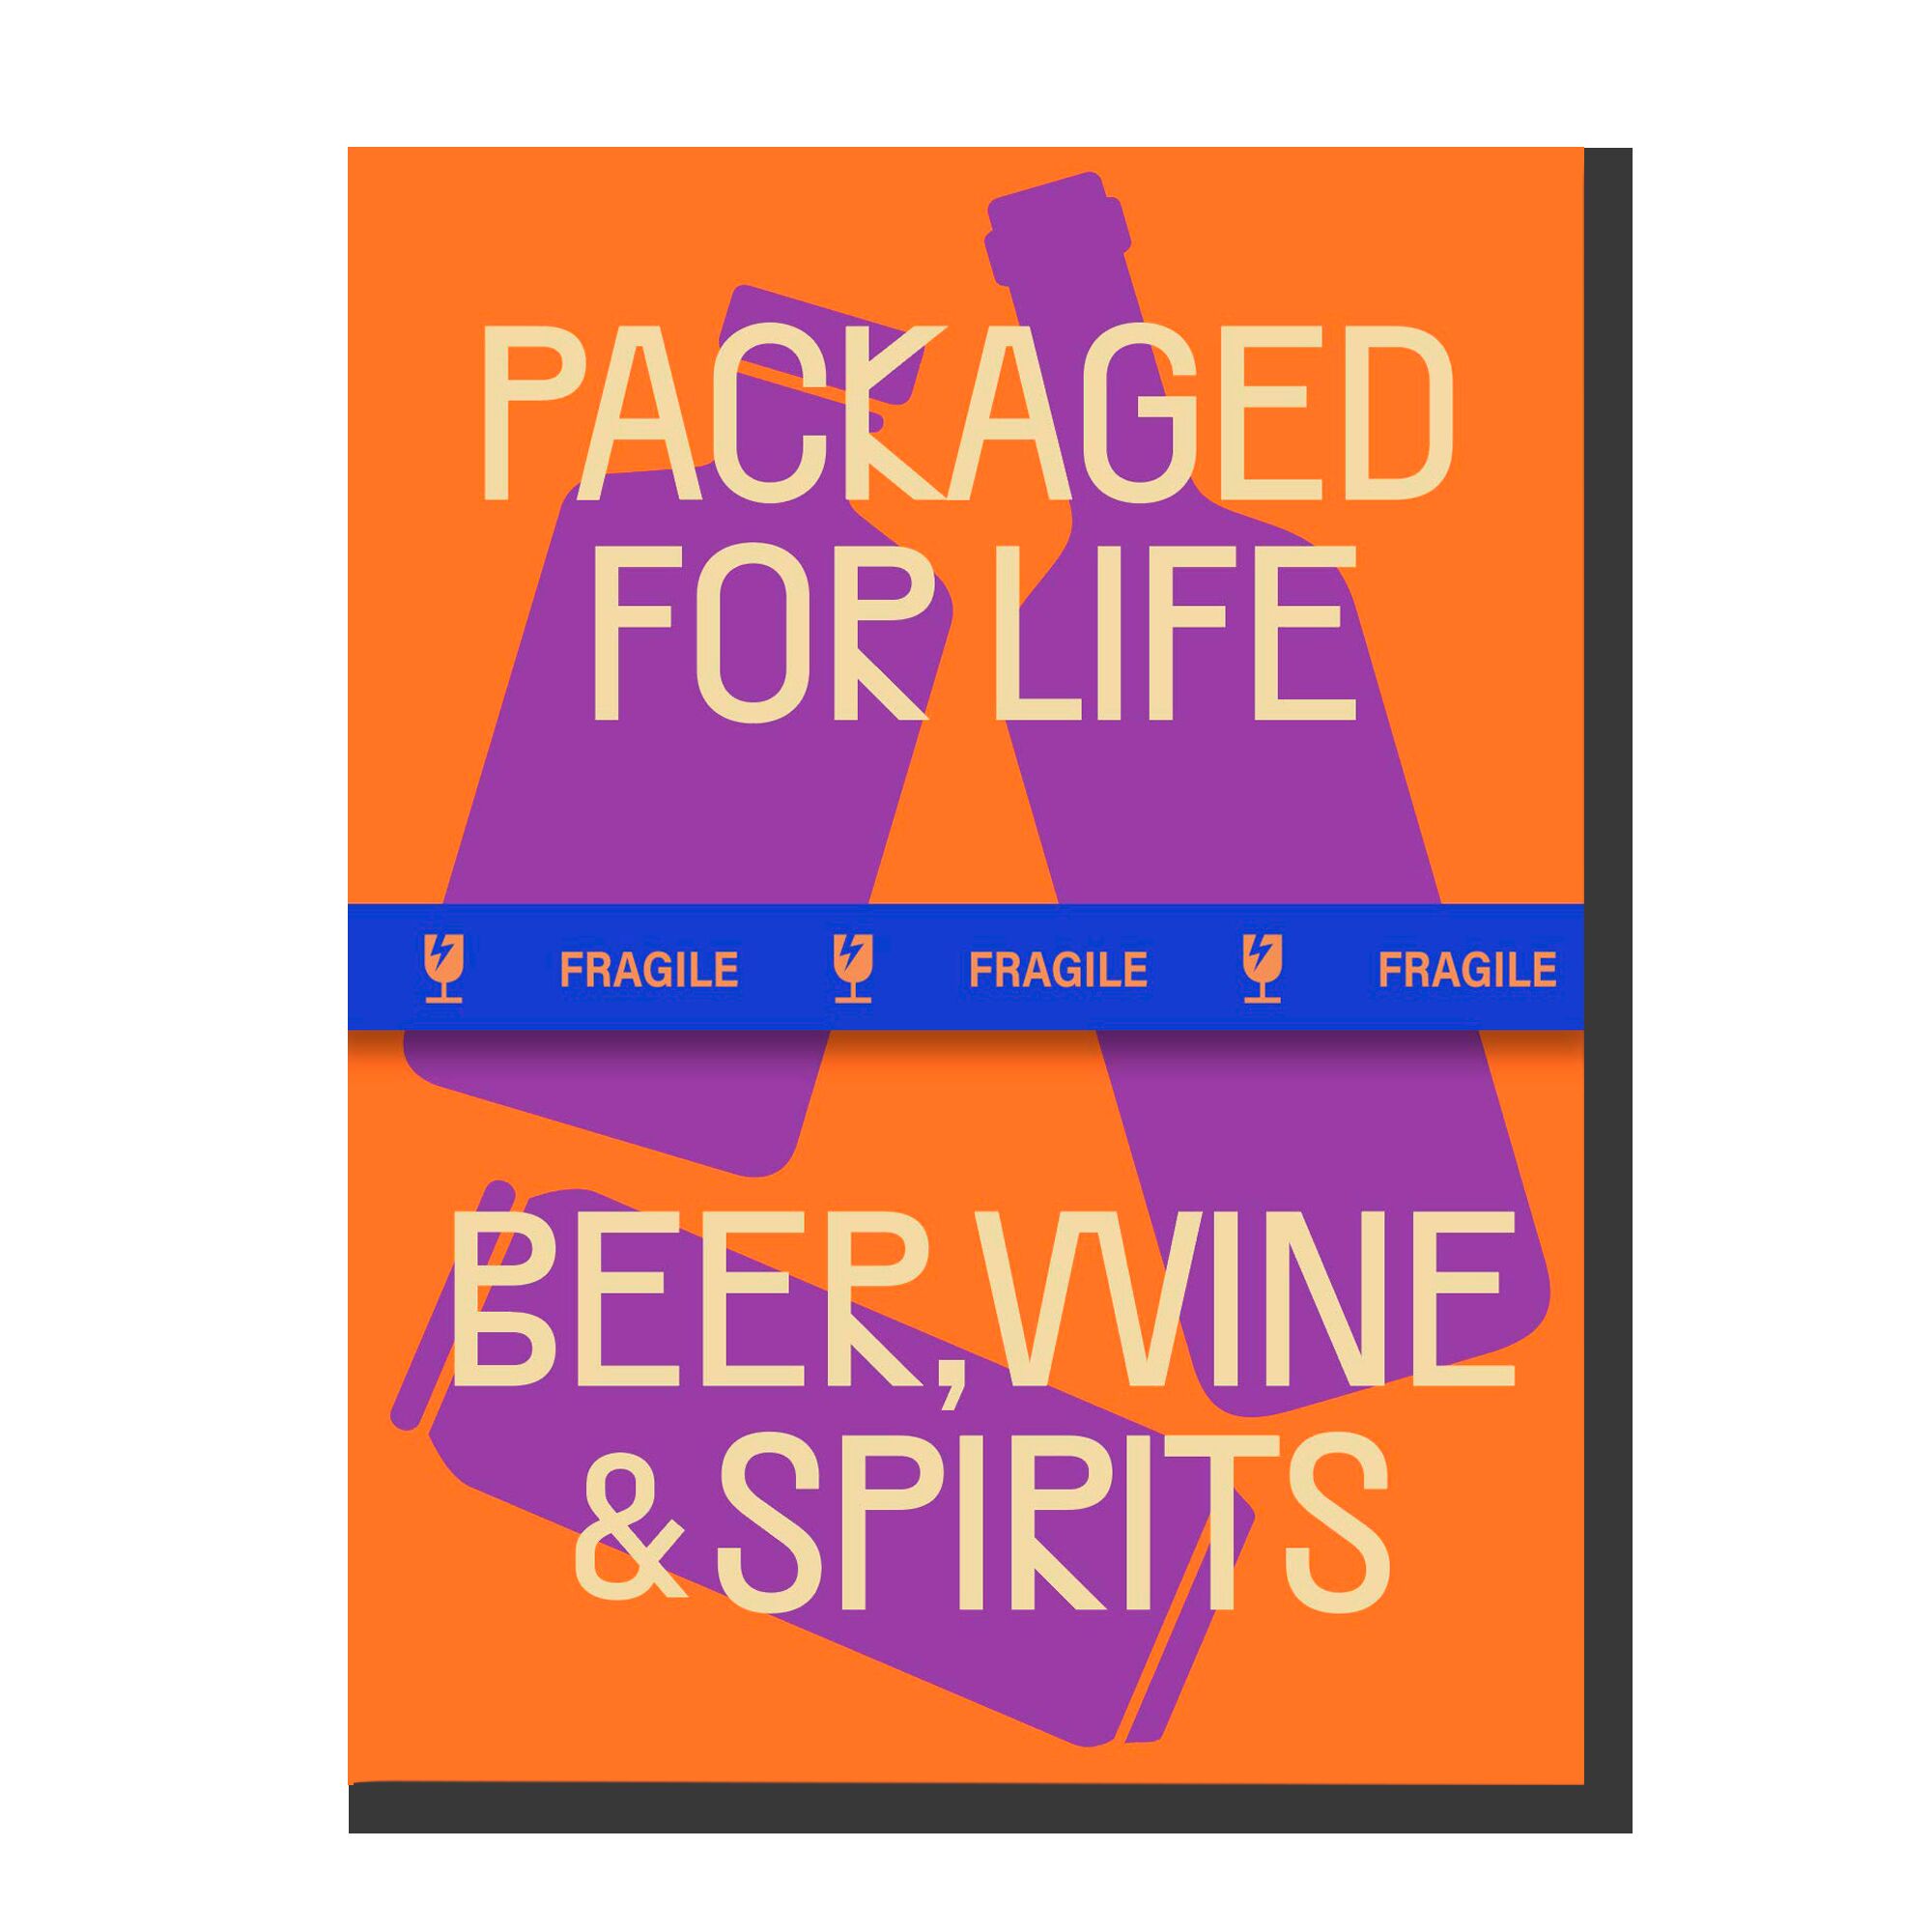 Packaged for Life: Beer, Wine, & Spirits